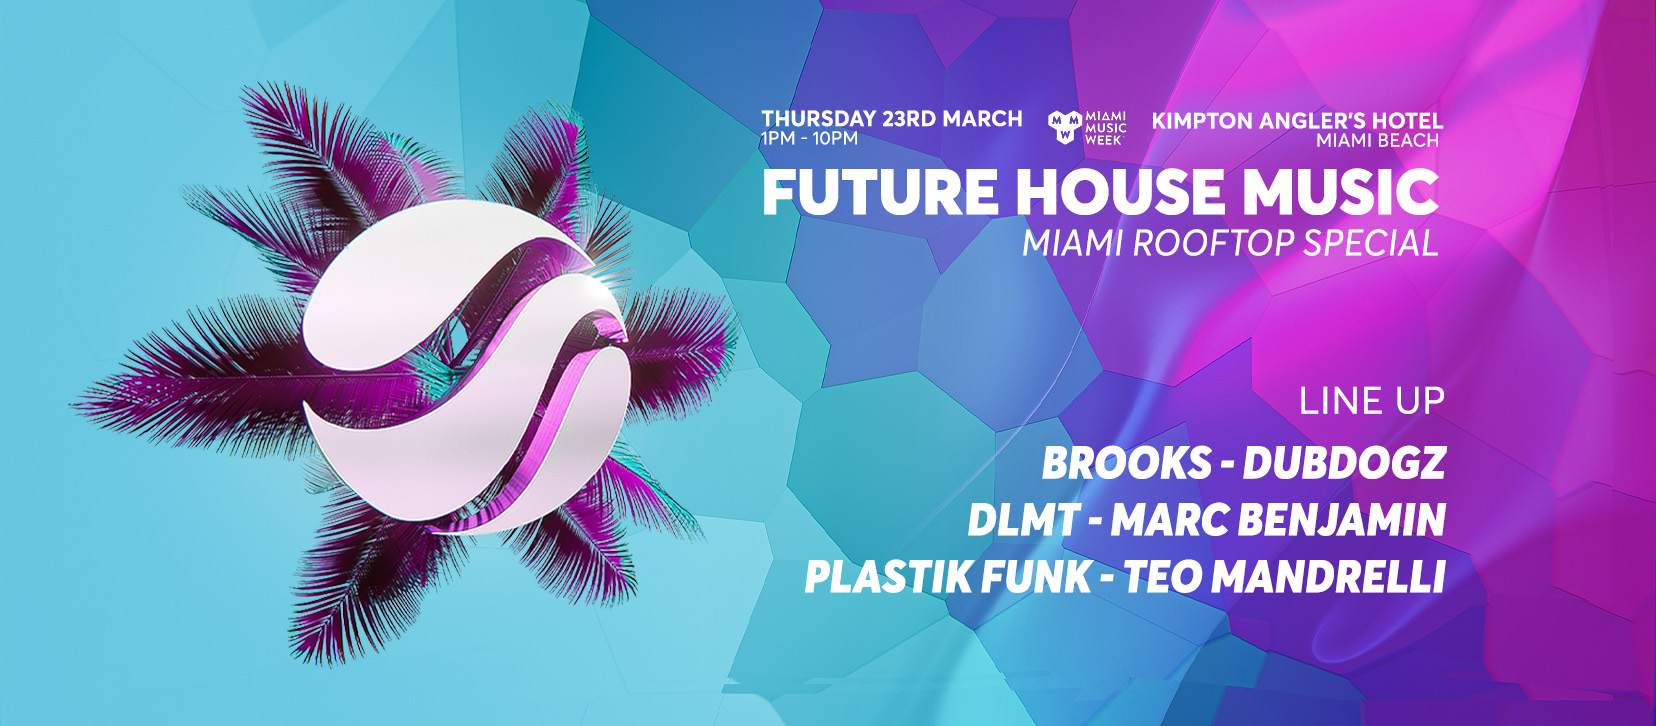 Future House Music - Miami Music Week - Rooftop Special - フライヤー表